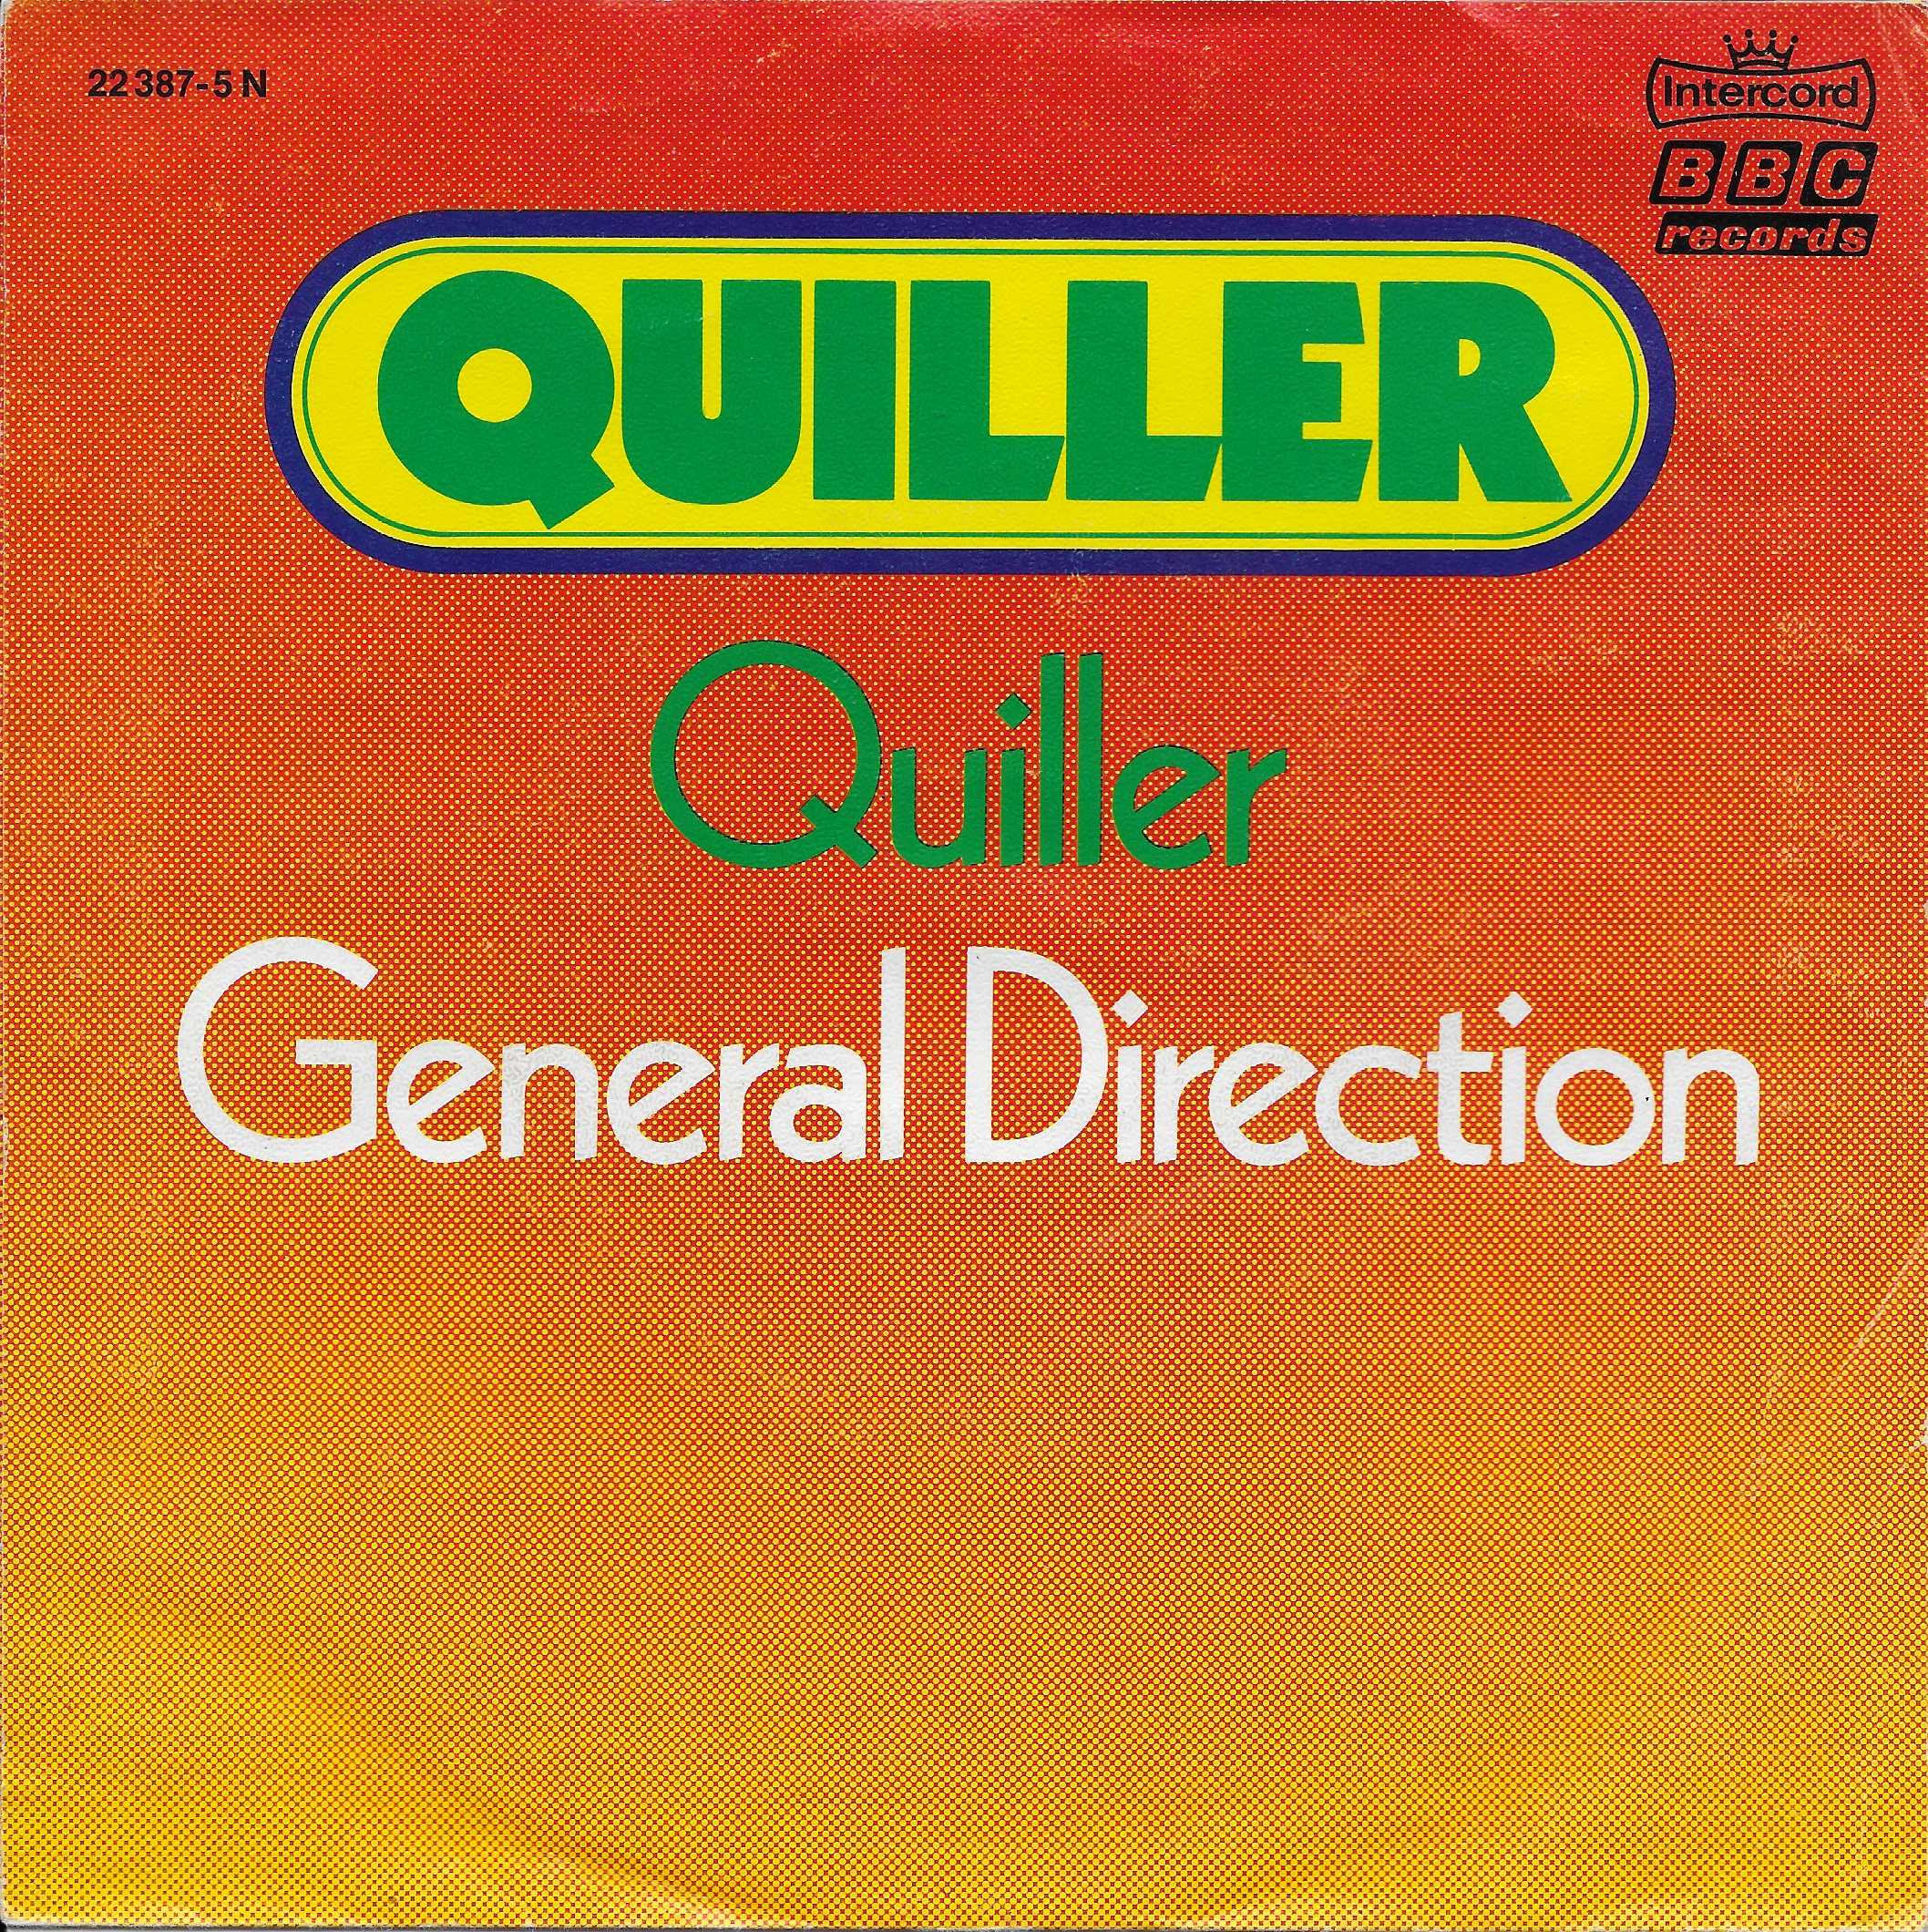 Picture of 22 387-5 N Quiller (German import) by artist Quiller from the BBC singles - Records and Tapes library